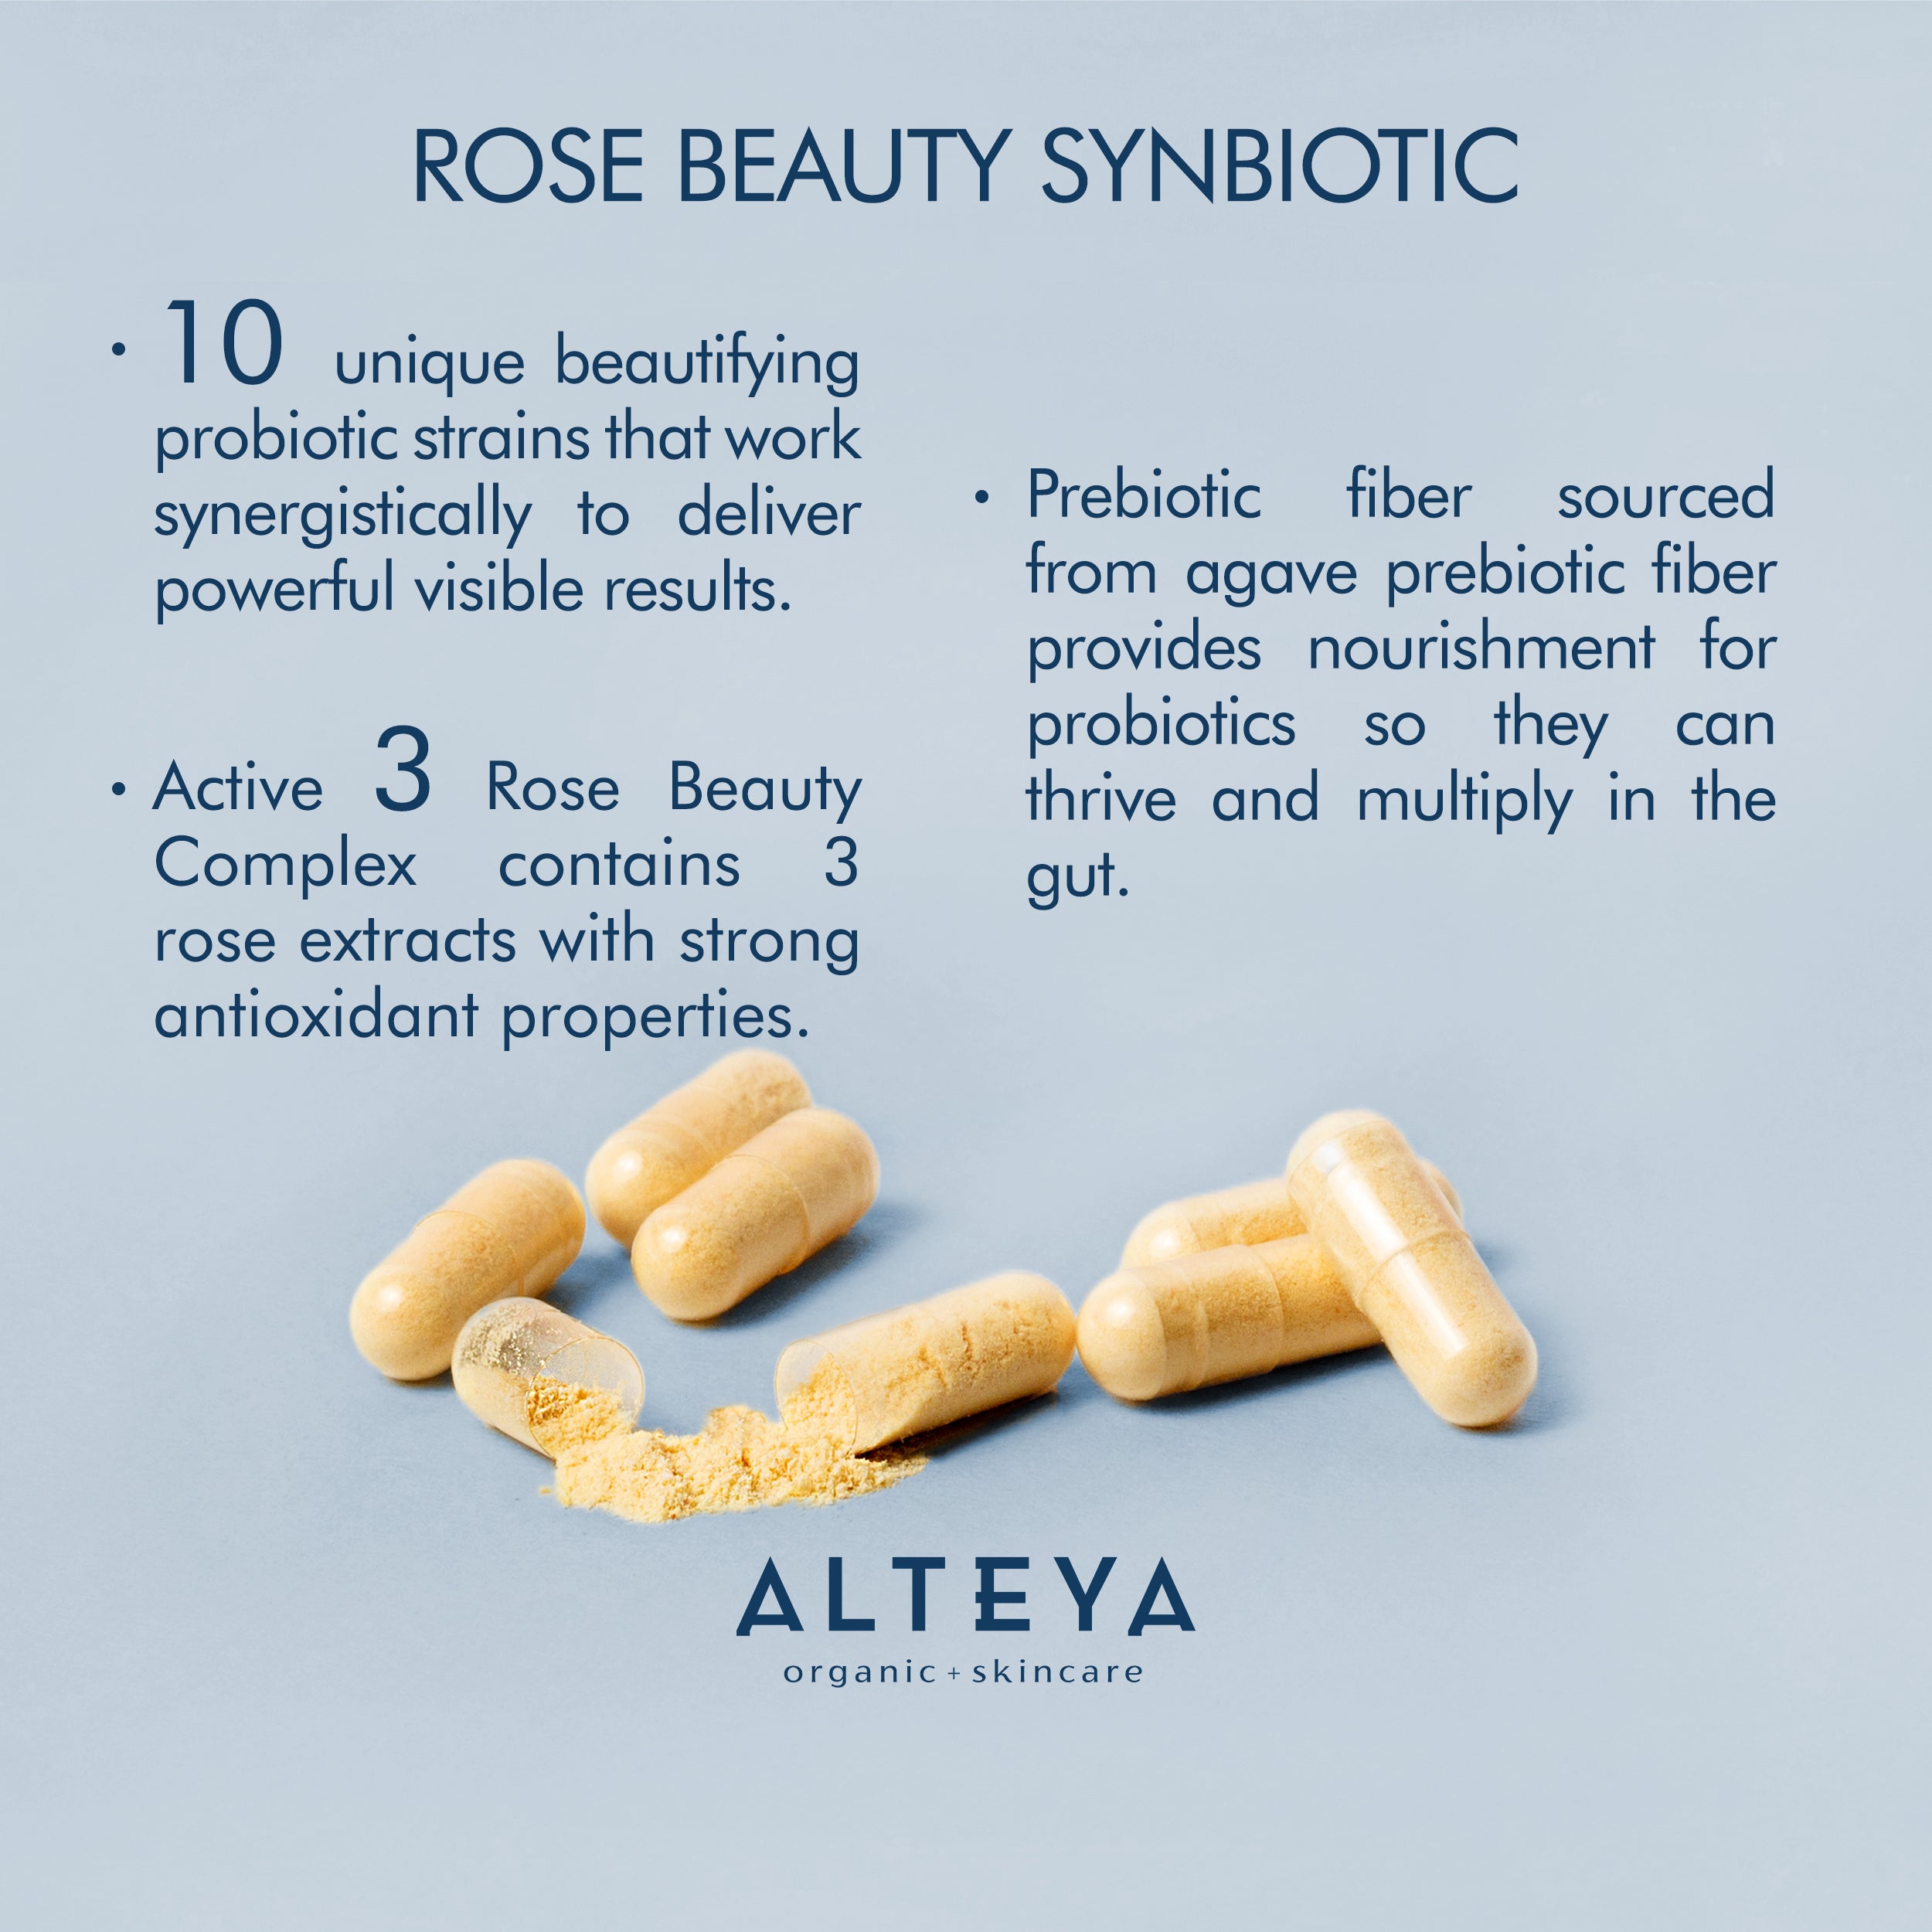 Alteya Organics' Rose Beauty Prebiotic and Probiotic - Synbiotic Skin & Metabolism Vegan Organic Supplement is a powerful blend of organic probiotics that supports gut health and enhances overall beauty.